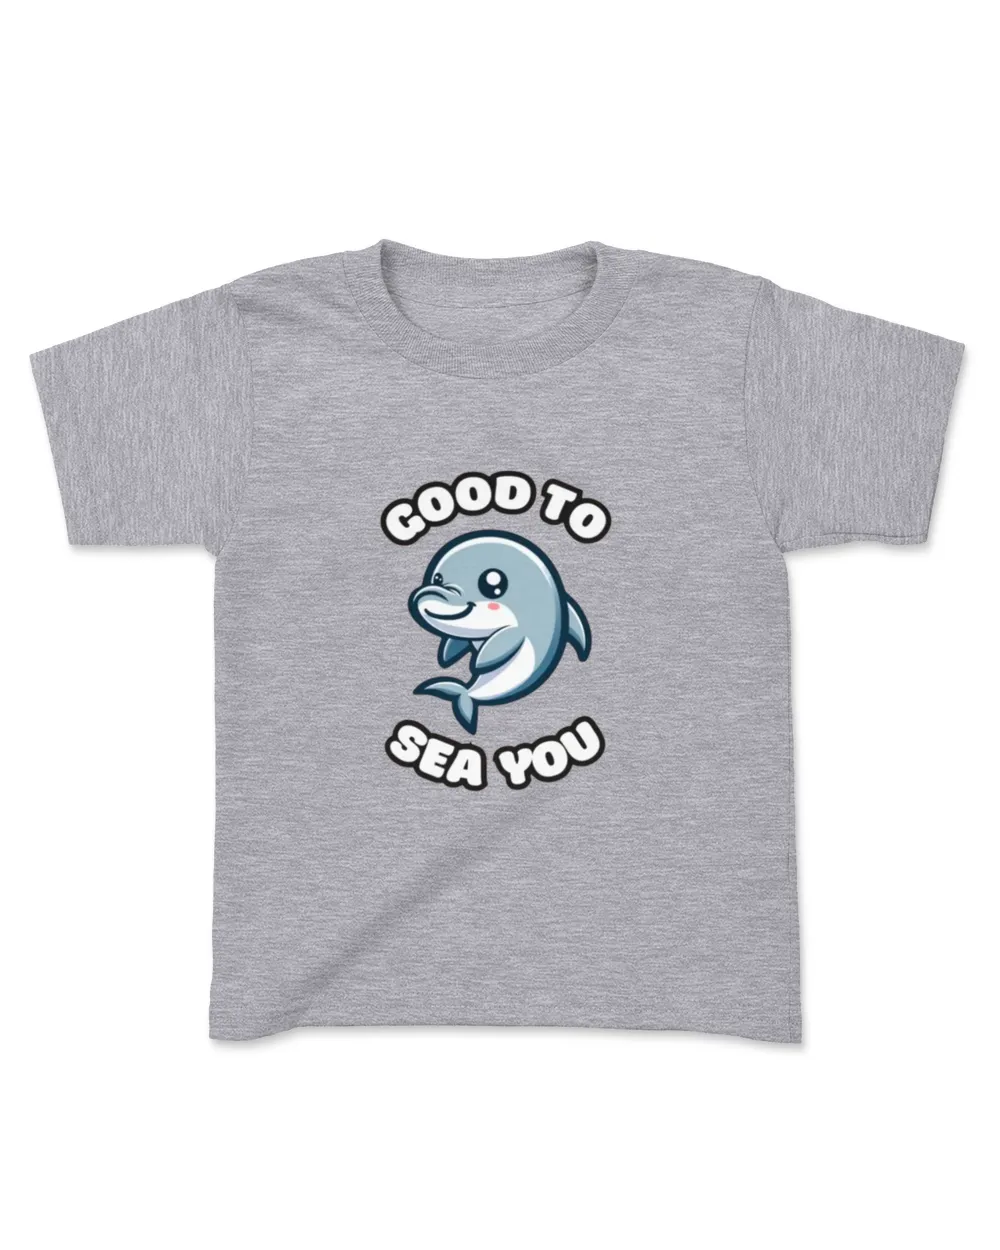 Good To Sea You - Dolphin T-shirt